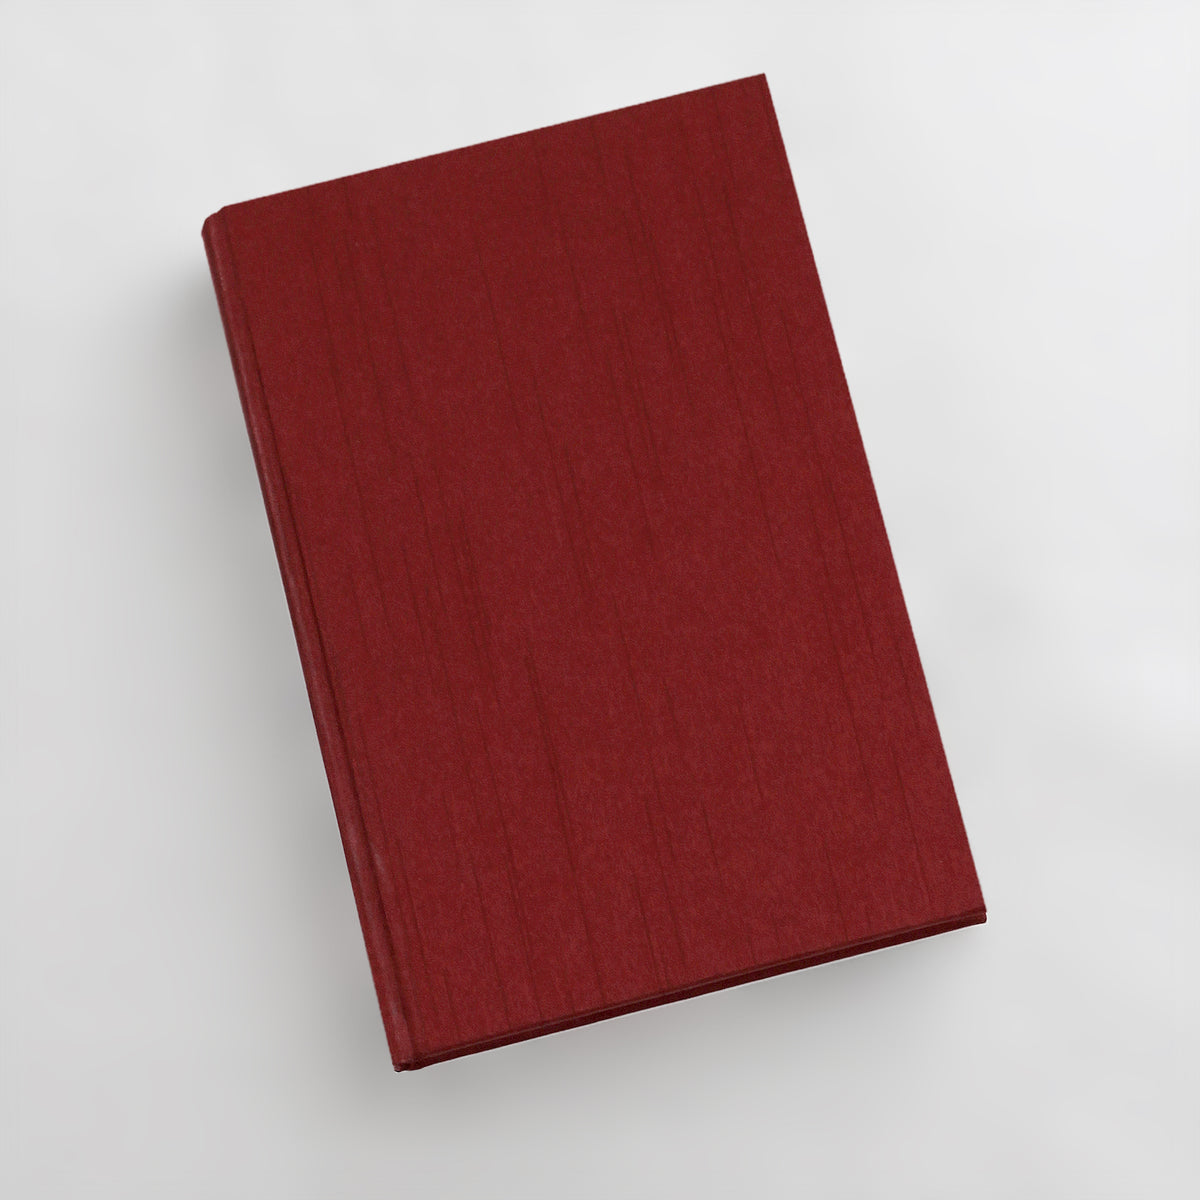 Medium 5.5x8.5 Blank Page Journal | Cover: Garnet Silk | Available Personalized